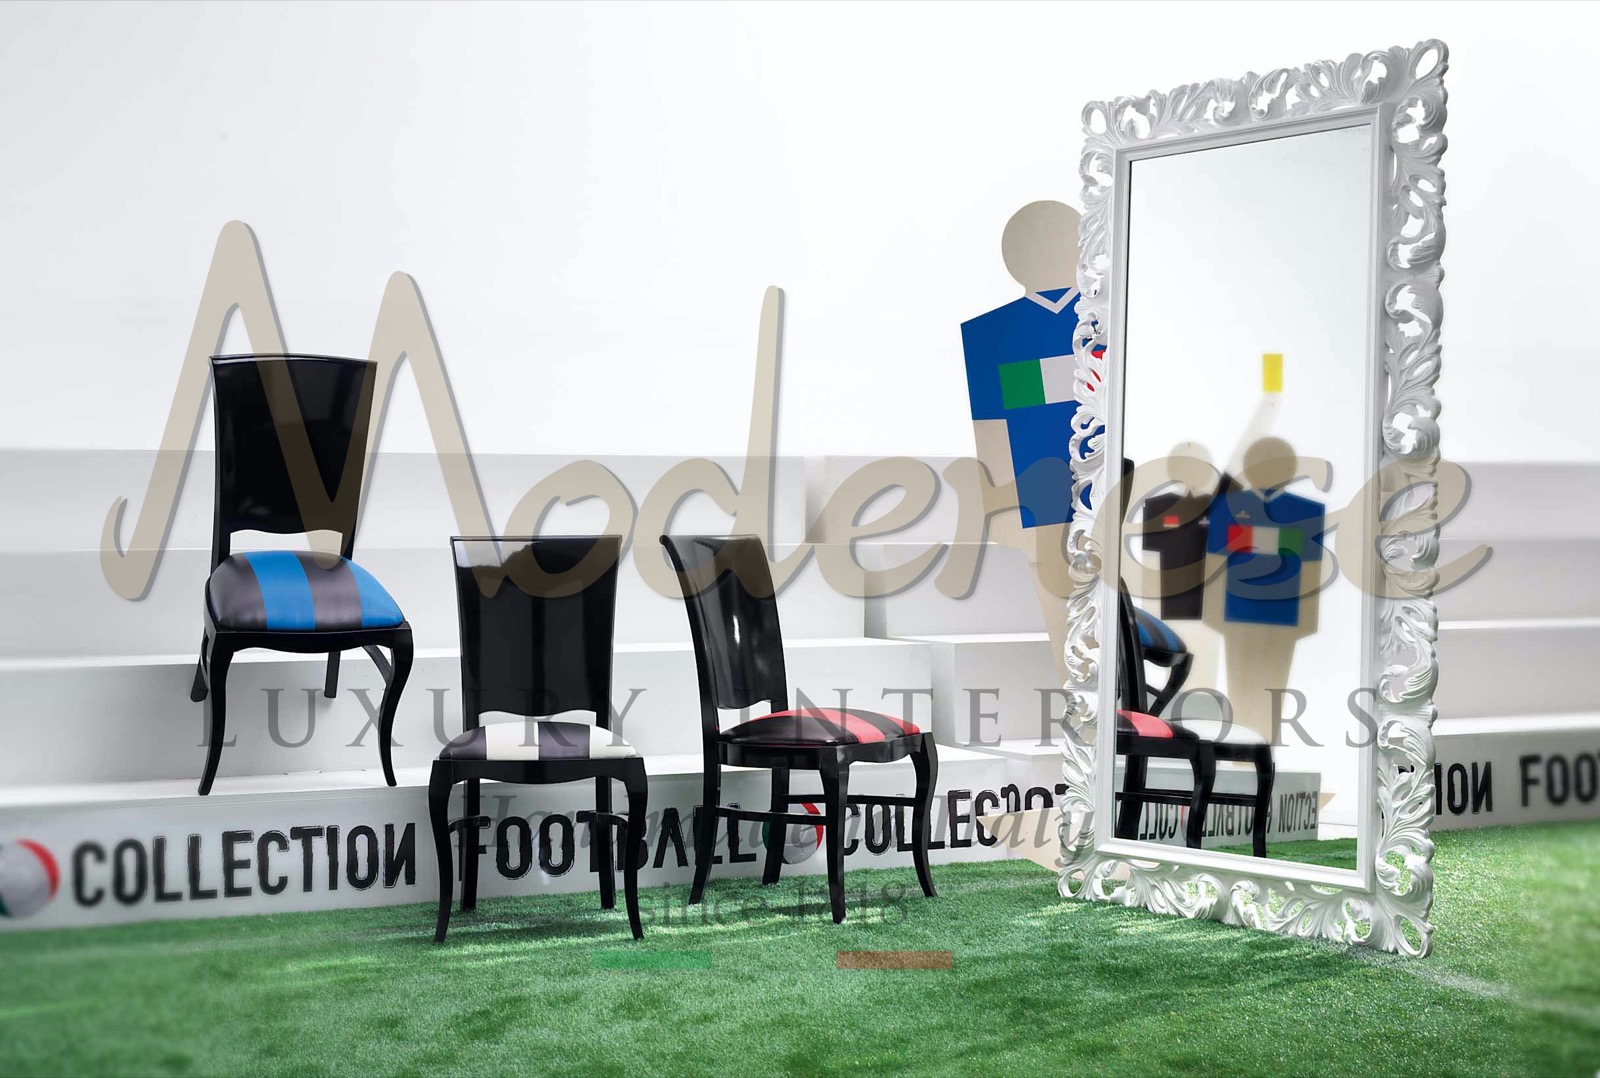 living room furniture entertainment football customized collection FIFA lovers home decoration artisanal handmade production